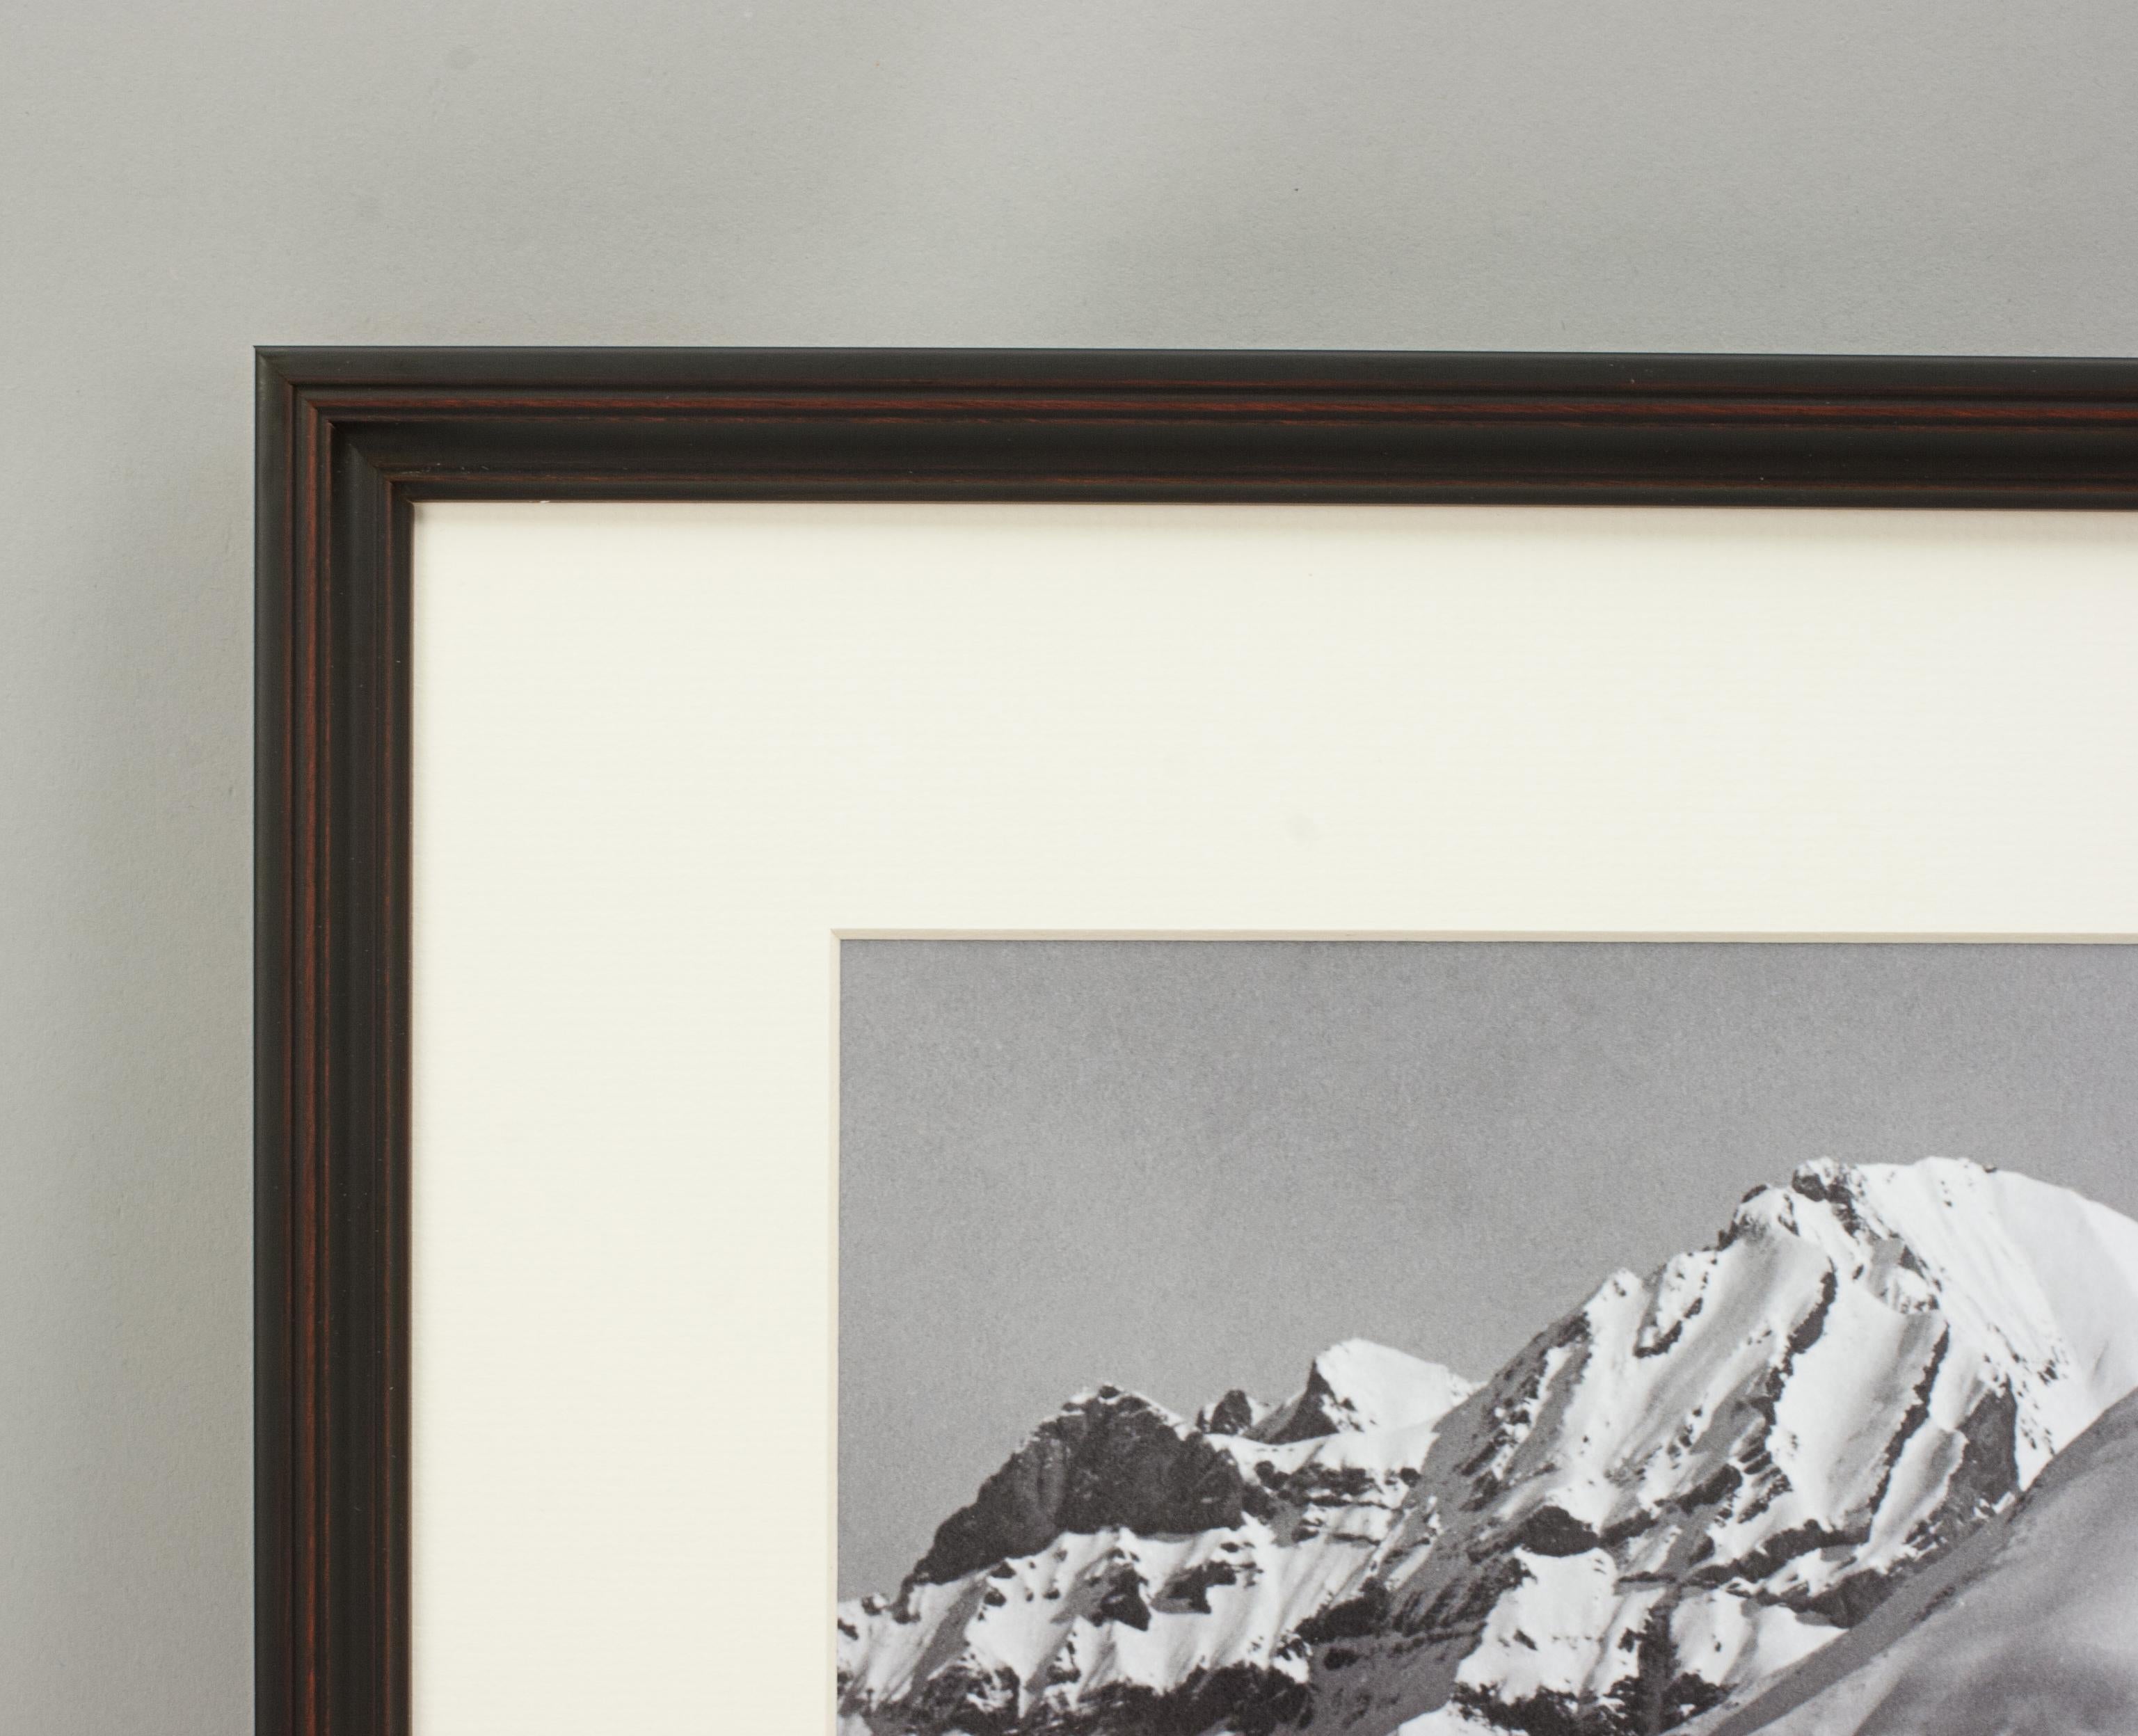 Paper Ski Photograph, 'On the Alpspitze with Zugspitze Behind', from Original, 1930s For Sale